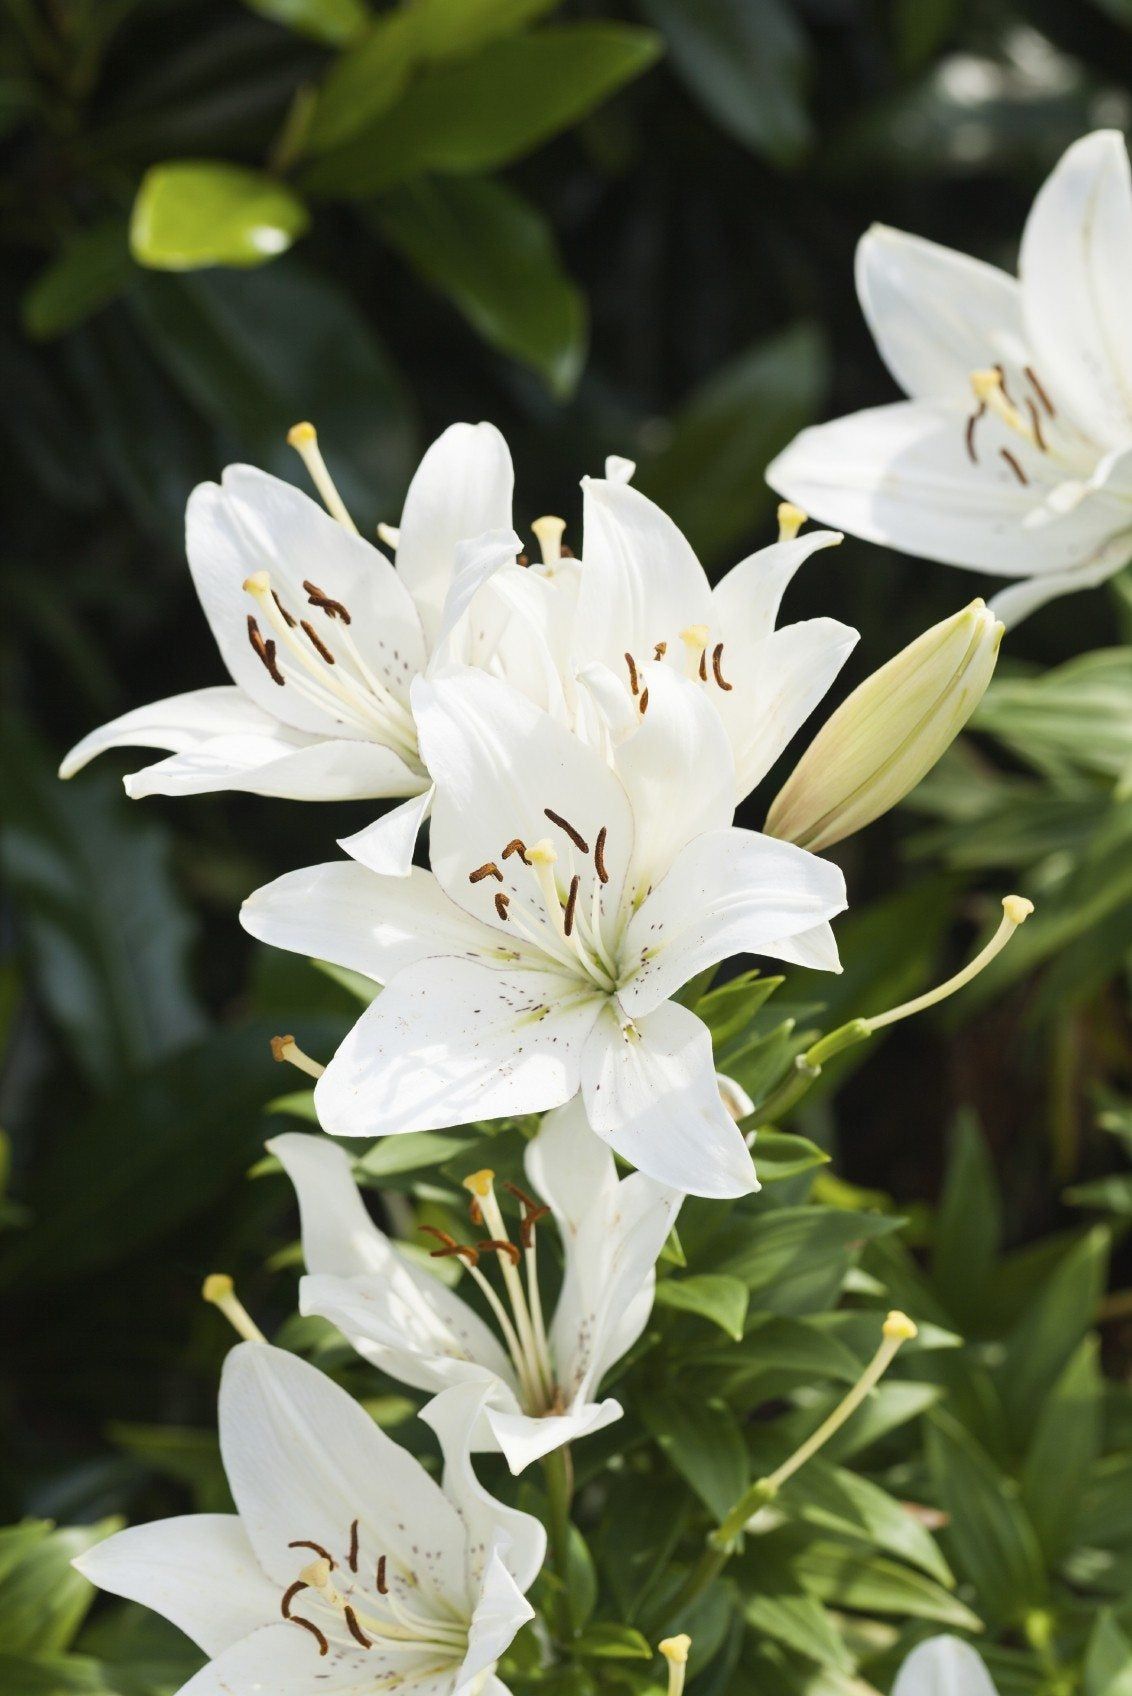 Trumpet Lily Plant Care - Information About Trumpet Lilies And Their ...